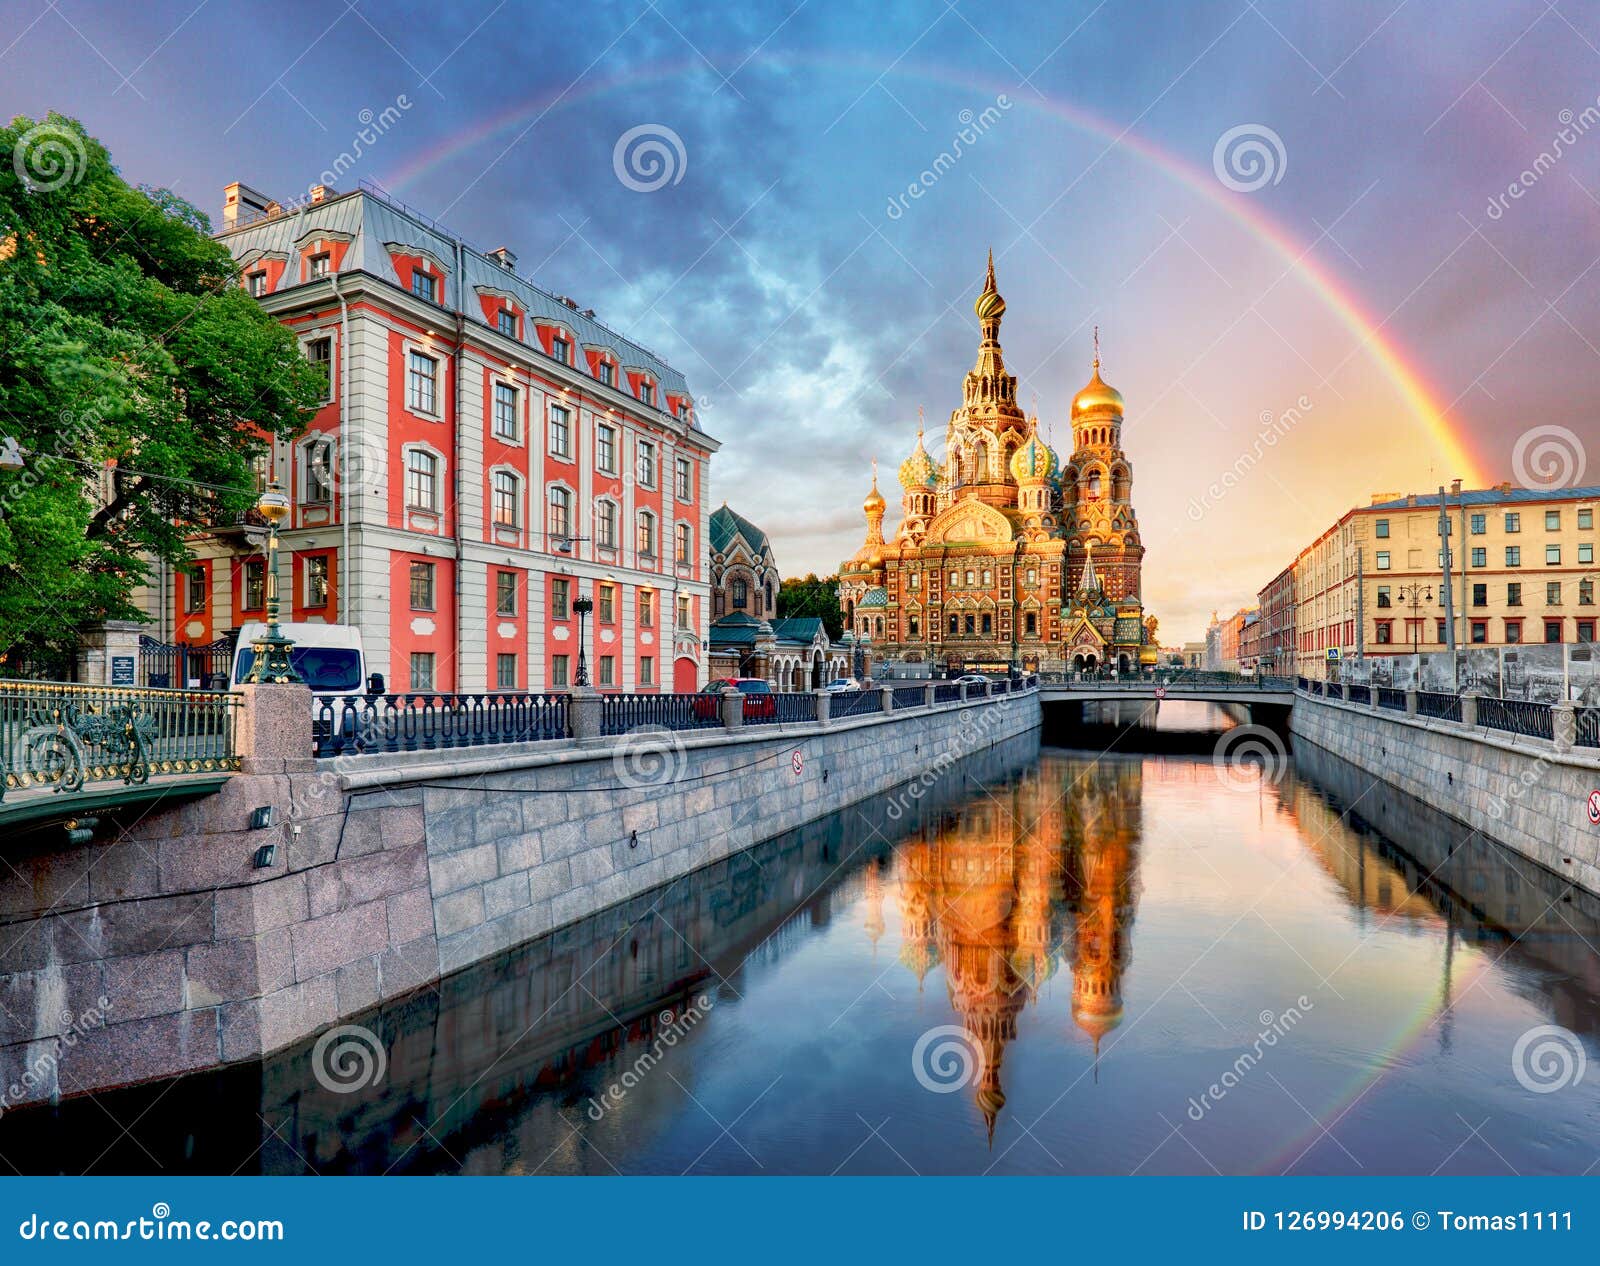 russia, st. petersburg - church saviour on spilled blood with ra